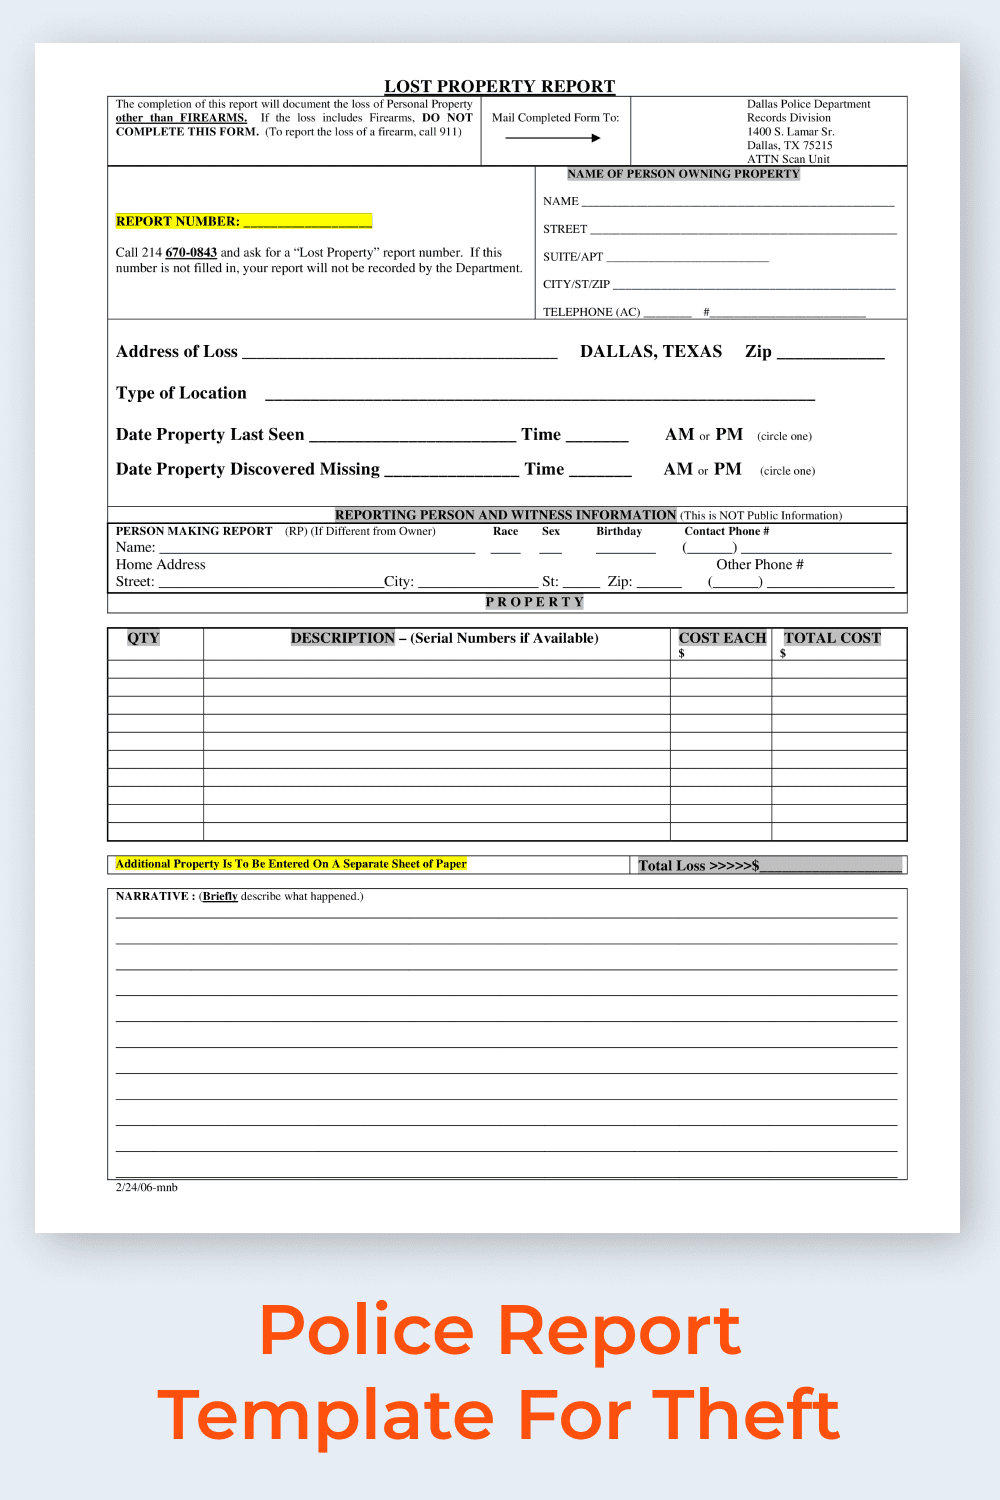 Police Report Template for Theft.